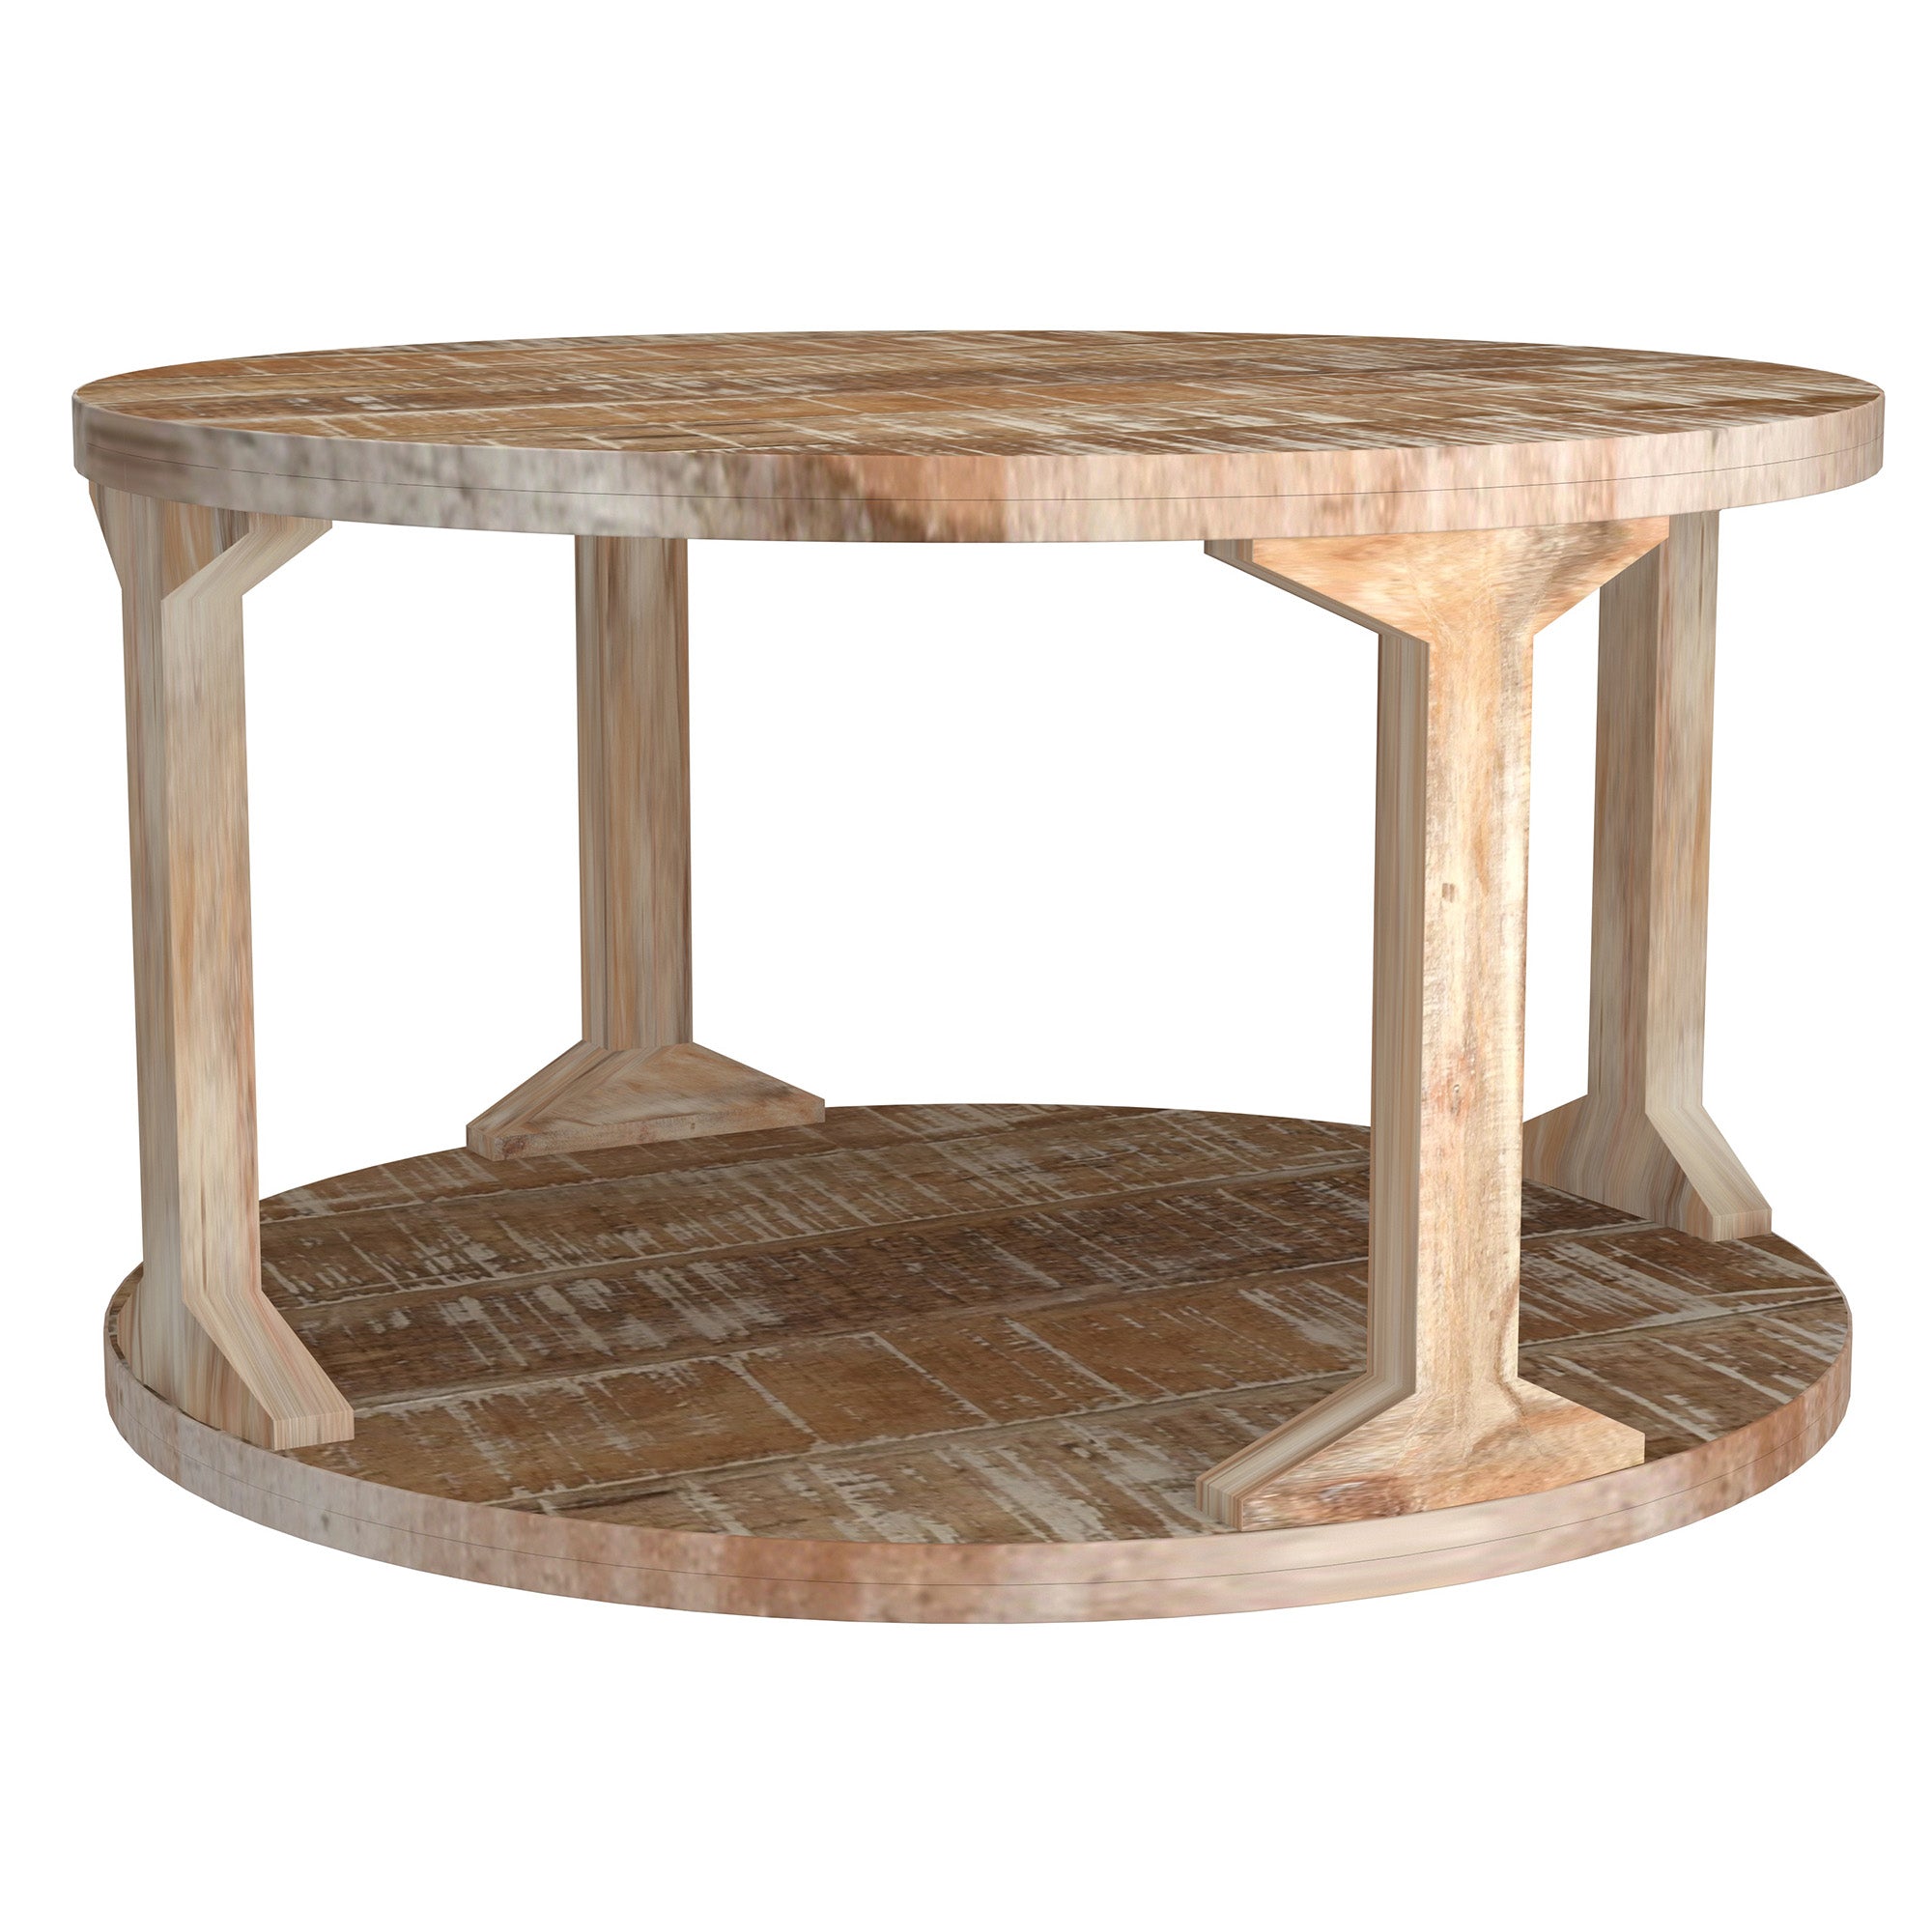 AVNI-COFFEE TABLE-DISTRESSED NATURAL